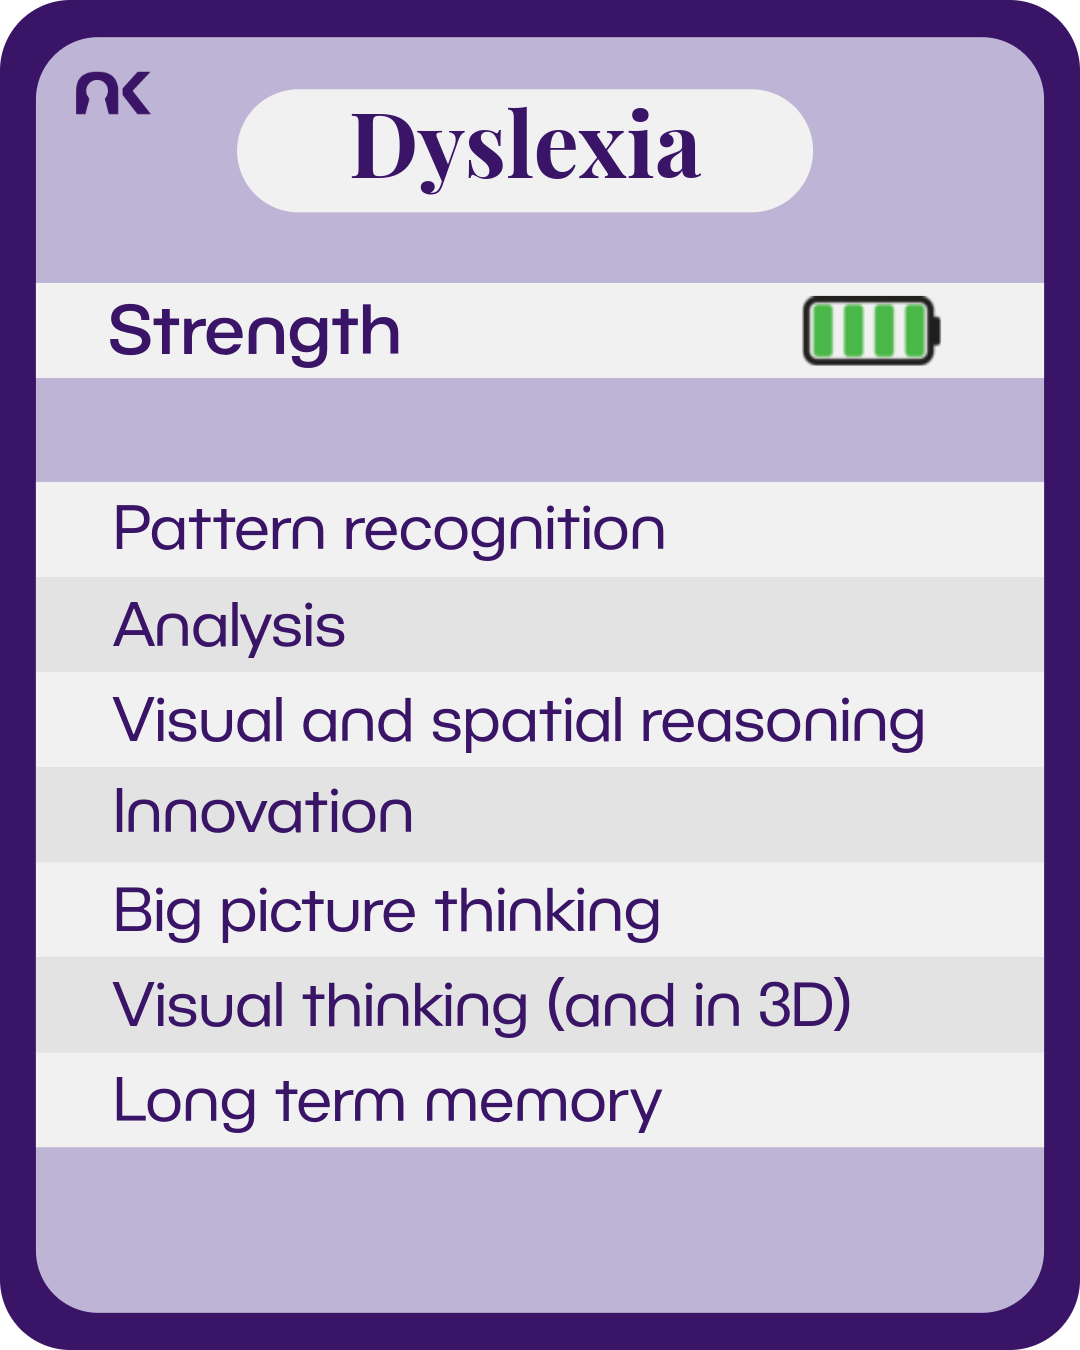 An information card made to look like it is from a card game. Next to the subtitle "strength" is a battery with green bars to show full charge. Text says: "Dyslexia. Strength. Pattern recognition; Analysis; Visual and spatial reasoning; Innovation; Big picture thinking; Visual thinking (and in 3D); Long term memory."